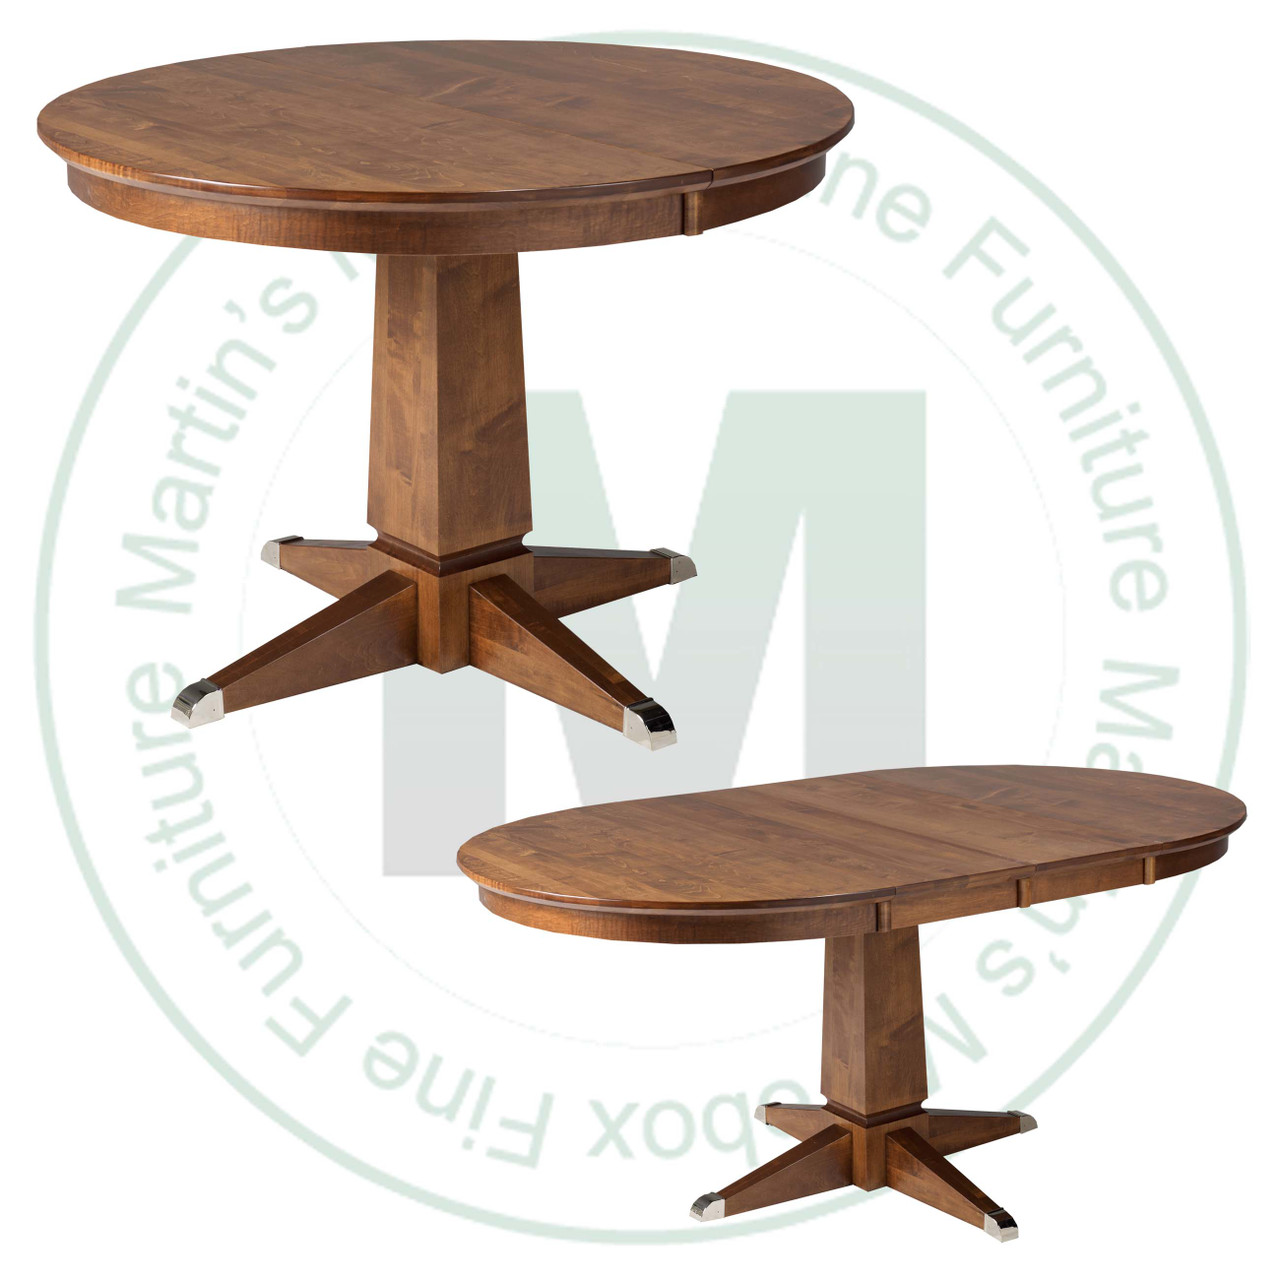 Wormy Maple Danish Single Pedestal Table 60''D x 60''W x 30''H With 2 - 12'' Leaves